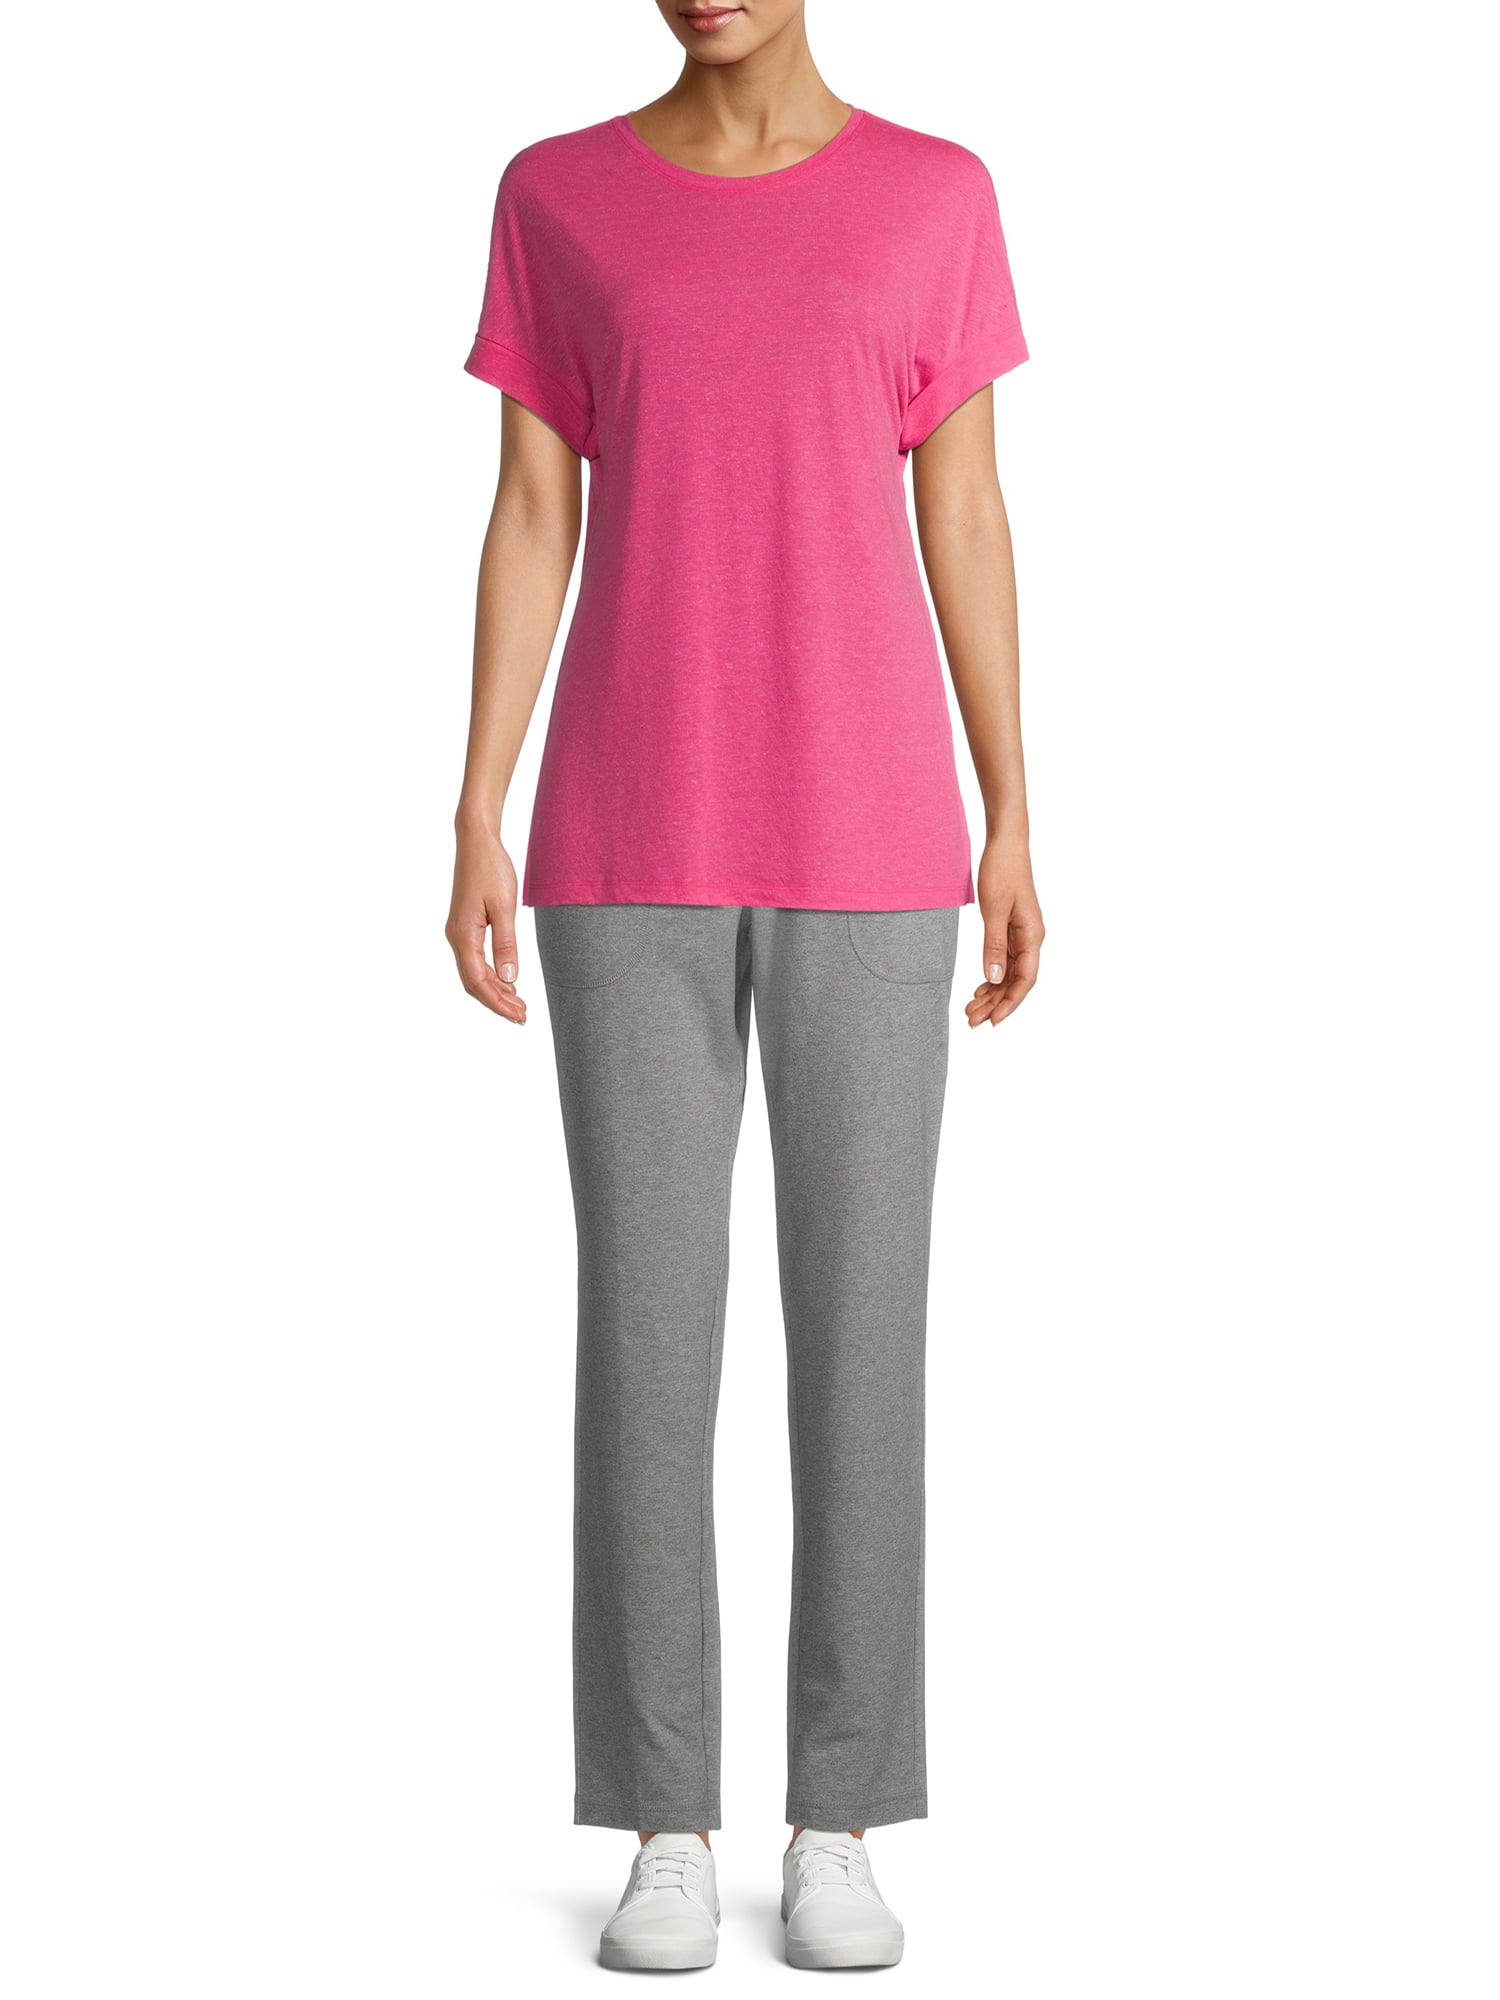 Athletic Works Women's Athleisure Performance Straight Leg Pant Available  in Regular and Petite - Walmart.com